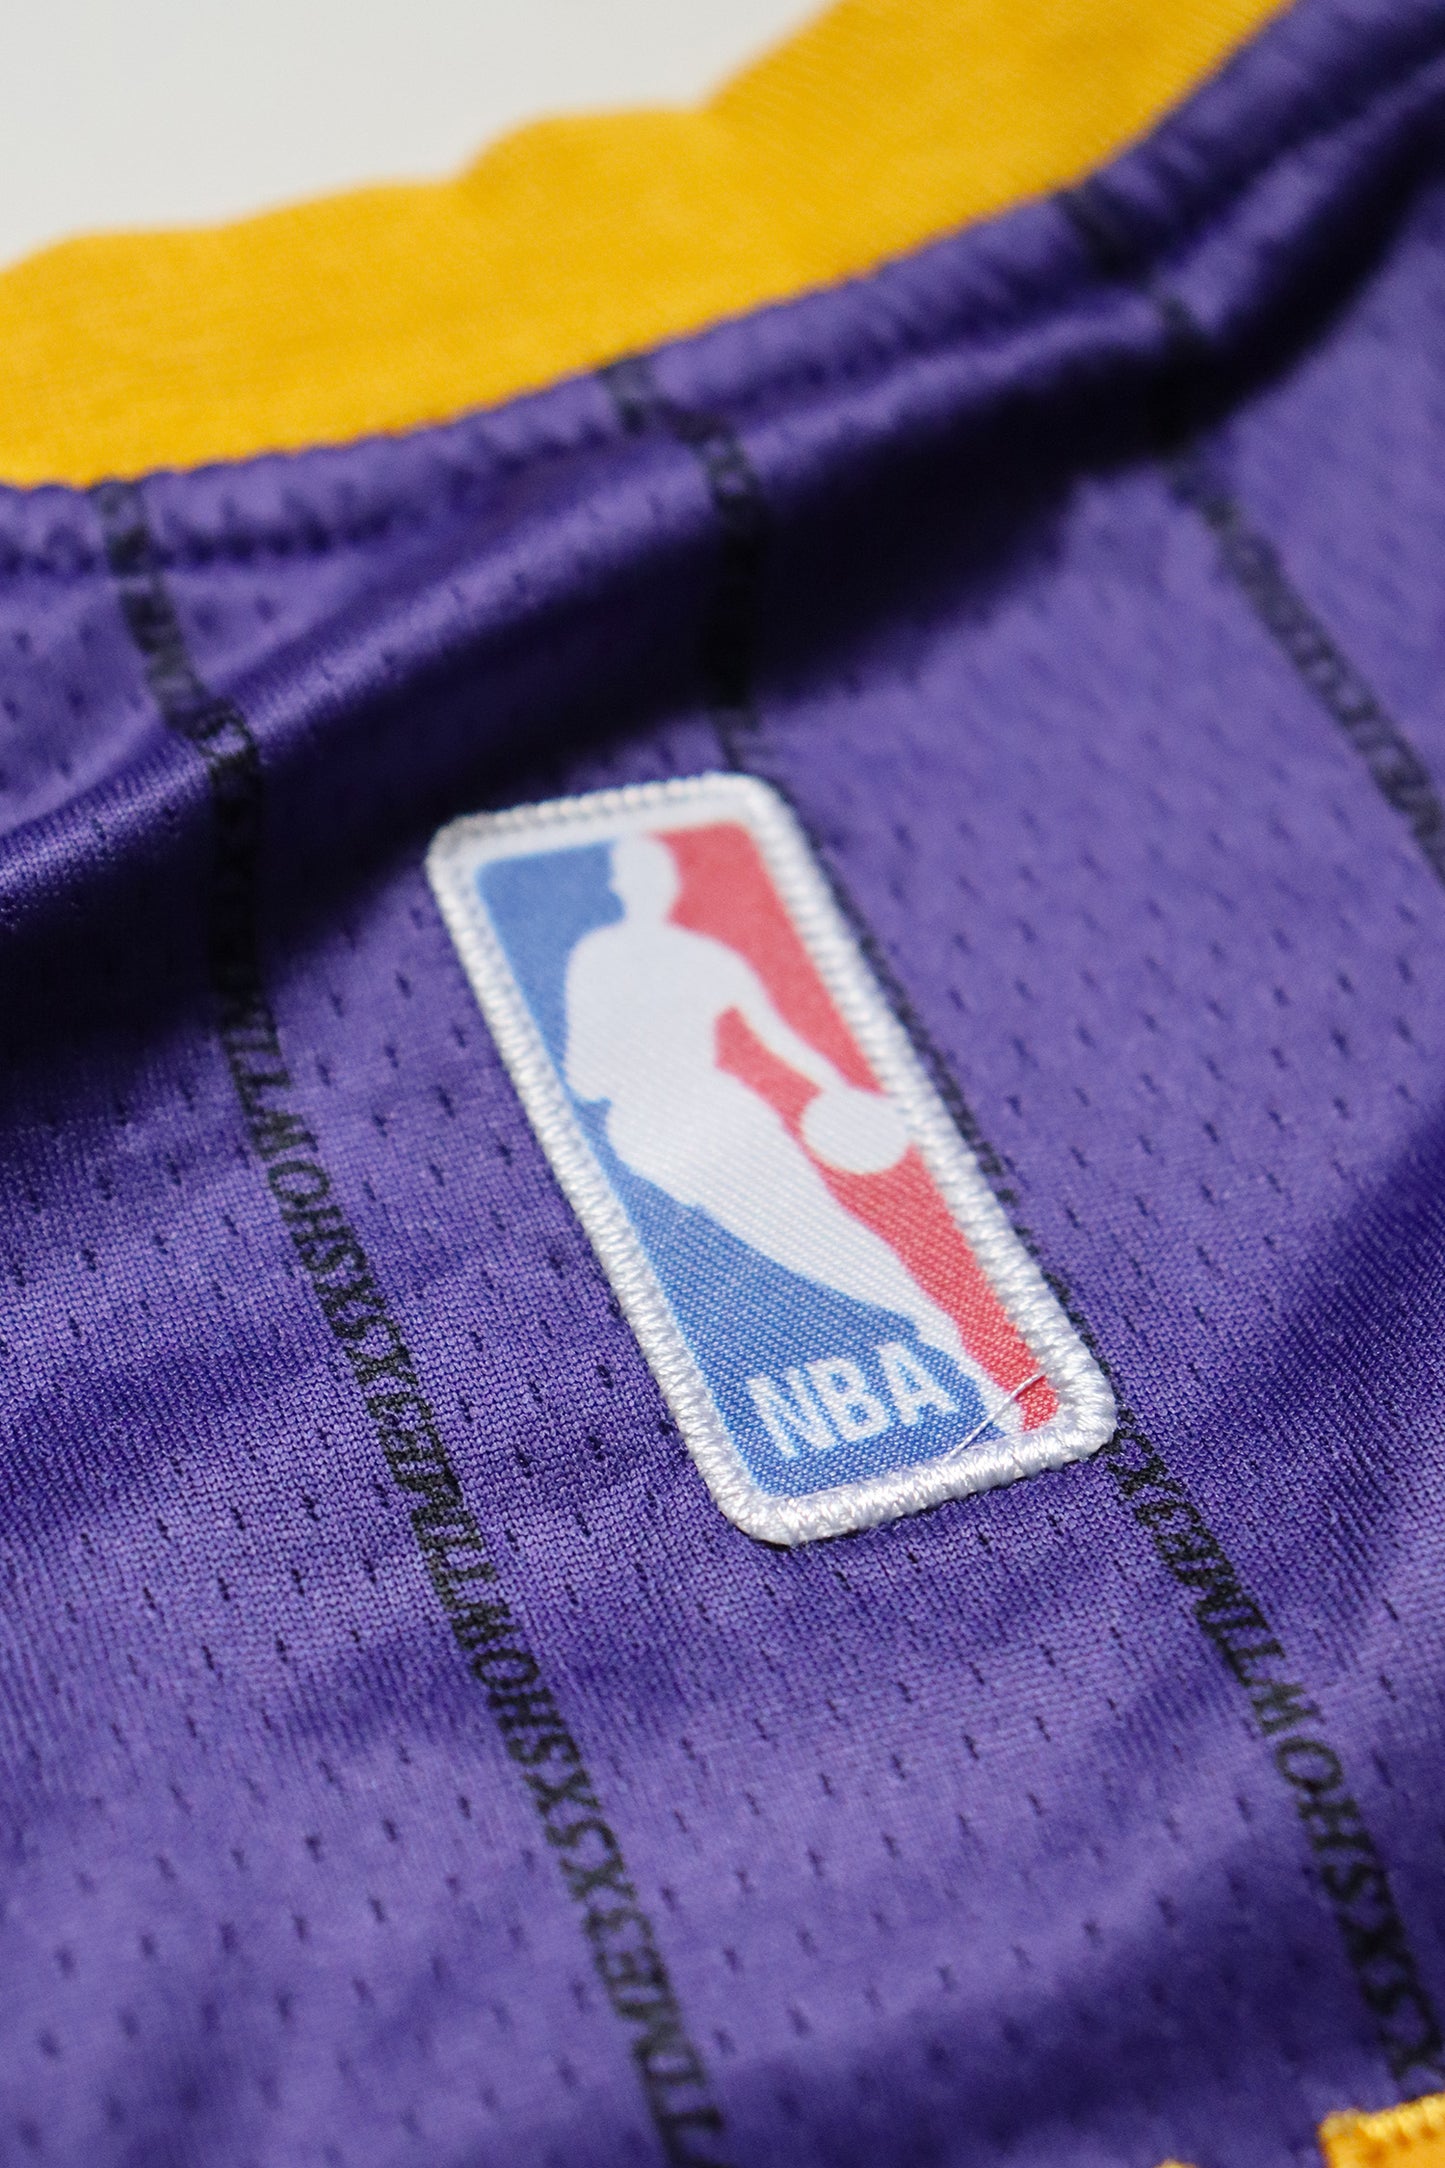 Maillot LeBron James Los Angeles Lakers